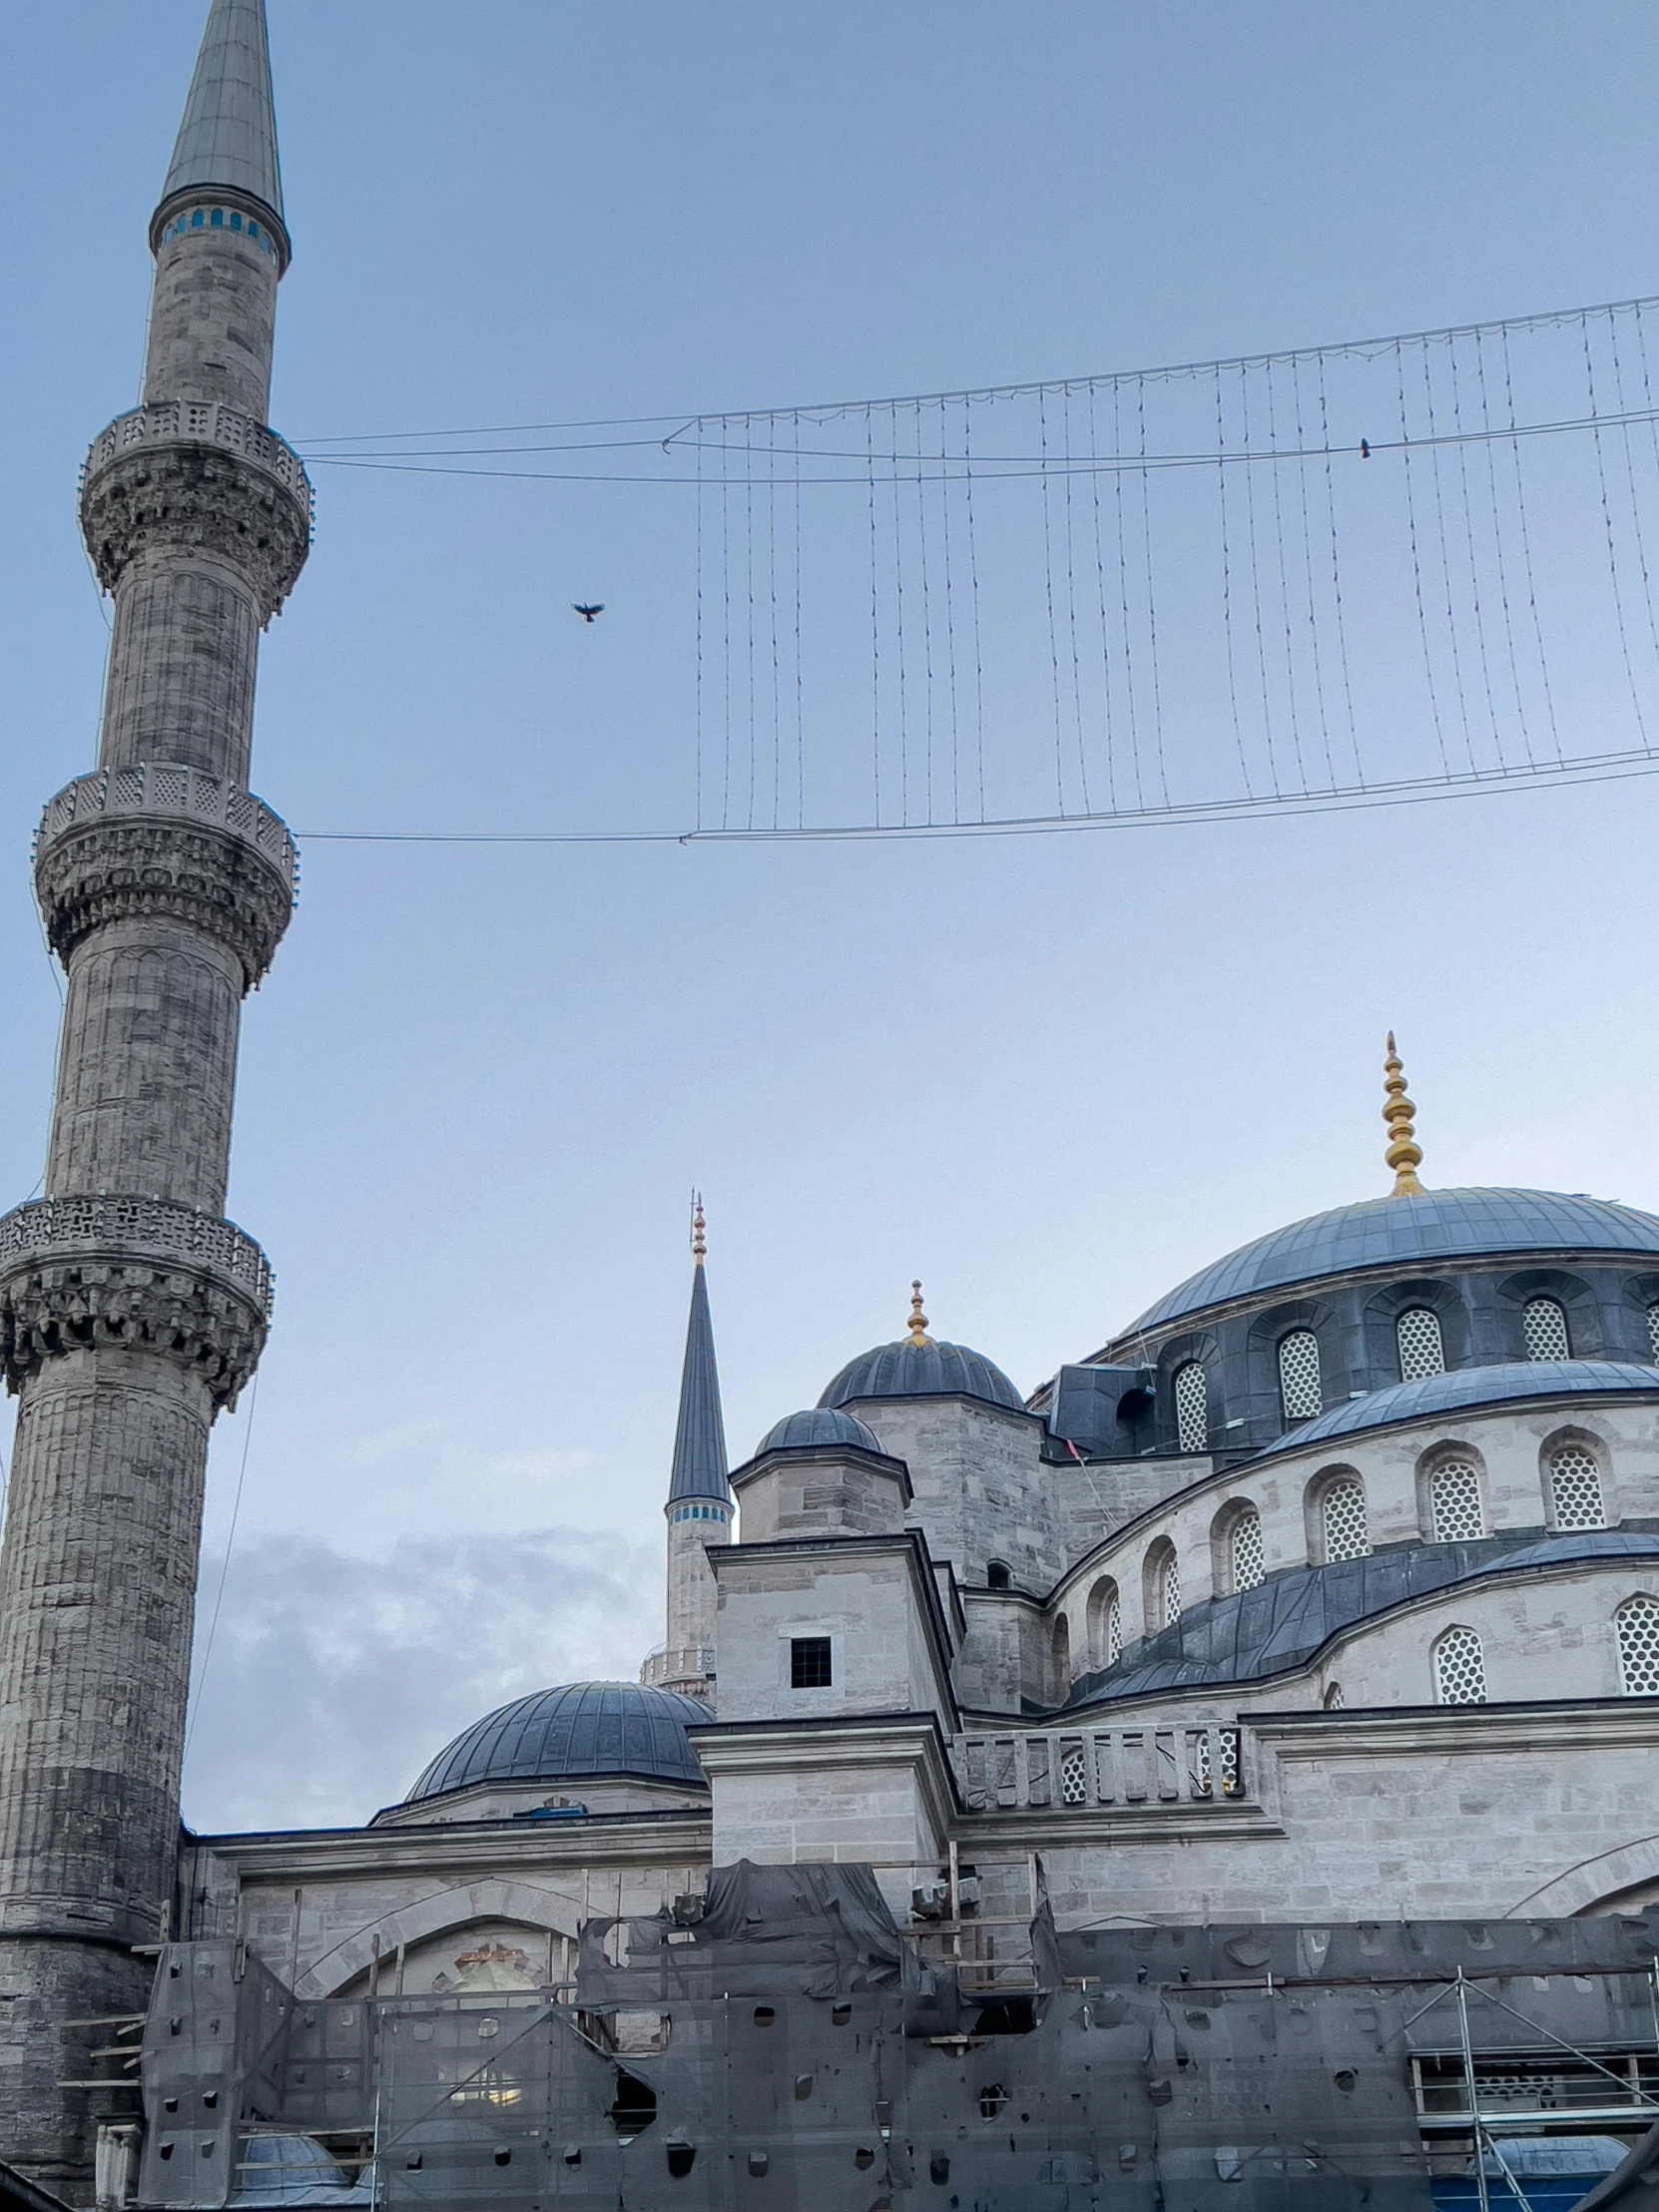 the blue mosque sits next to the wires that line the street